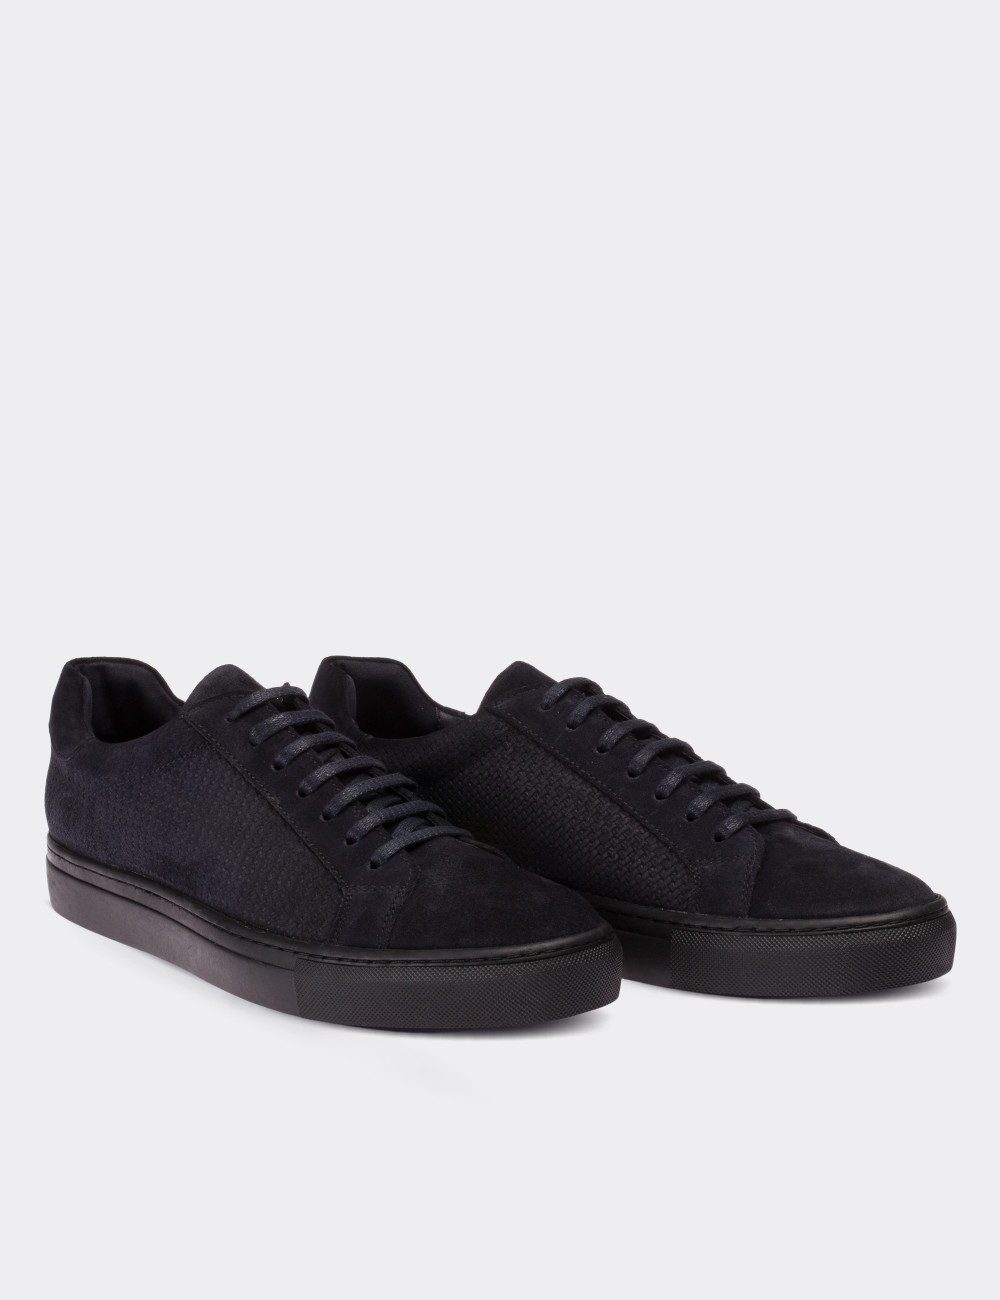 Navy Suede Leather Sneakers - 01681MLCVC02